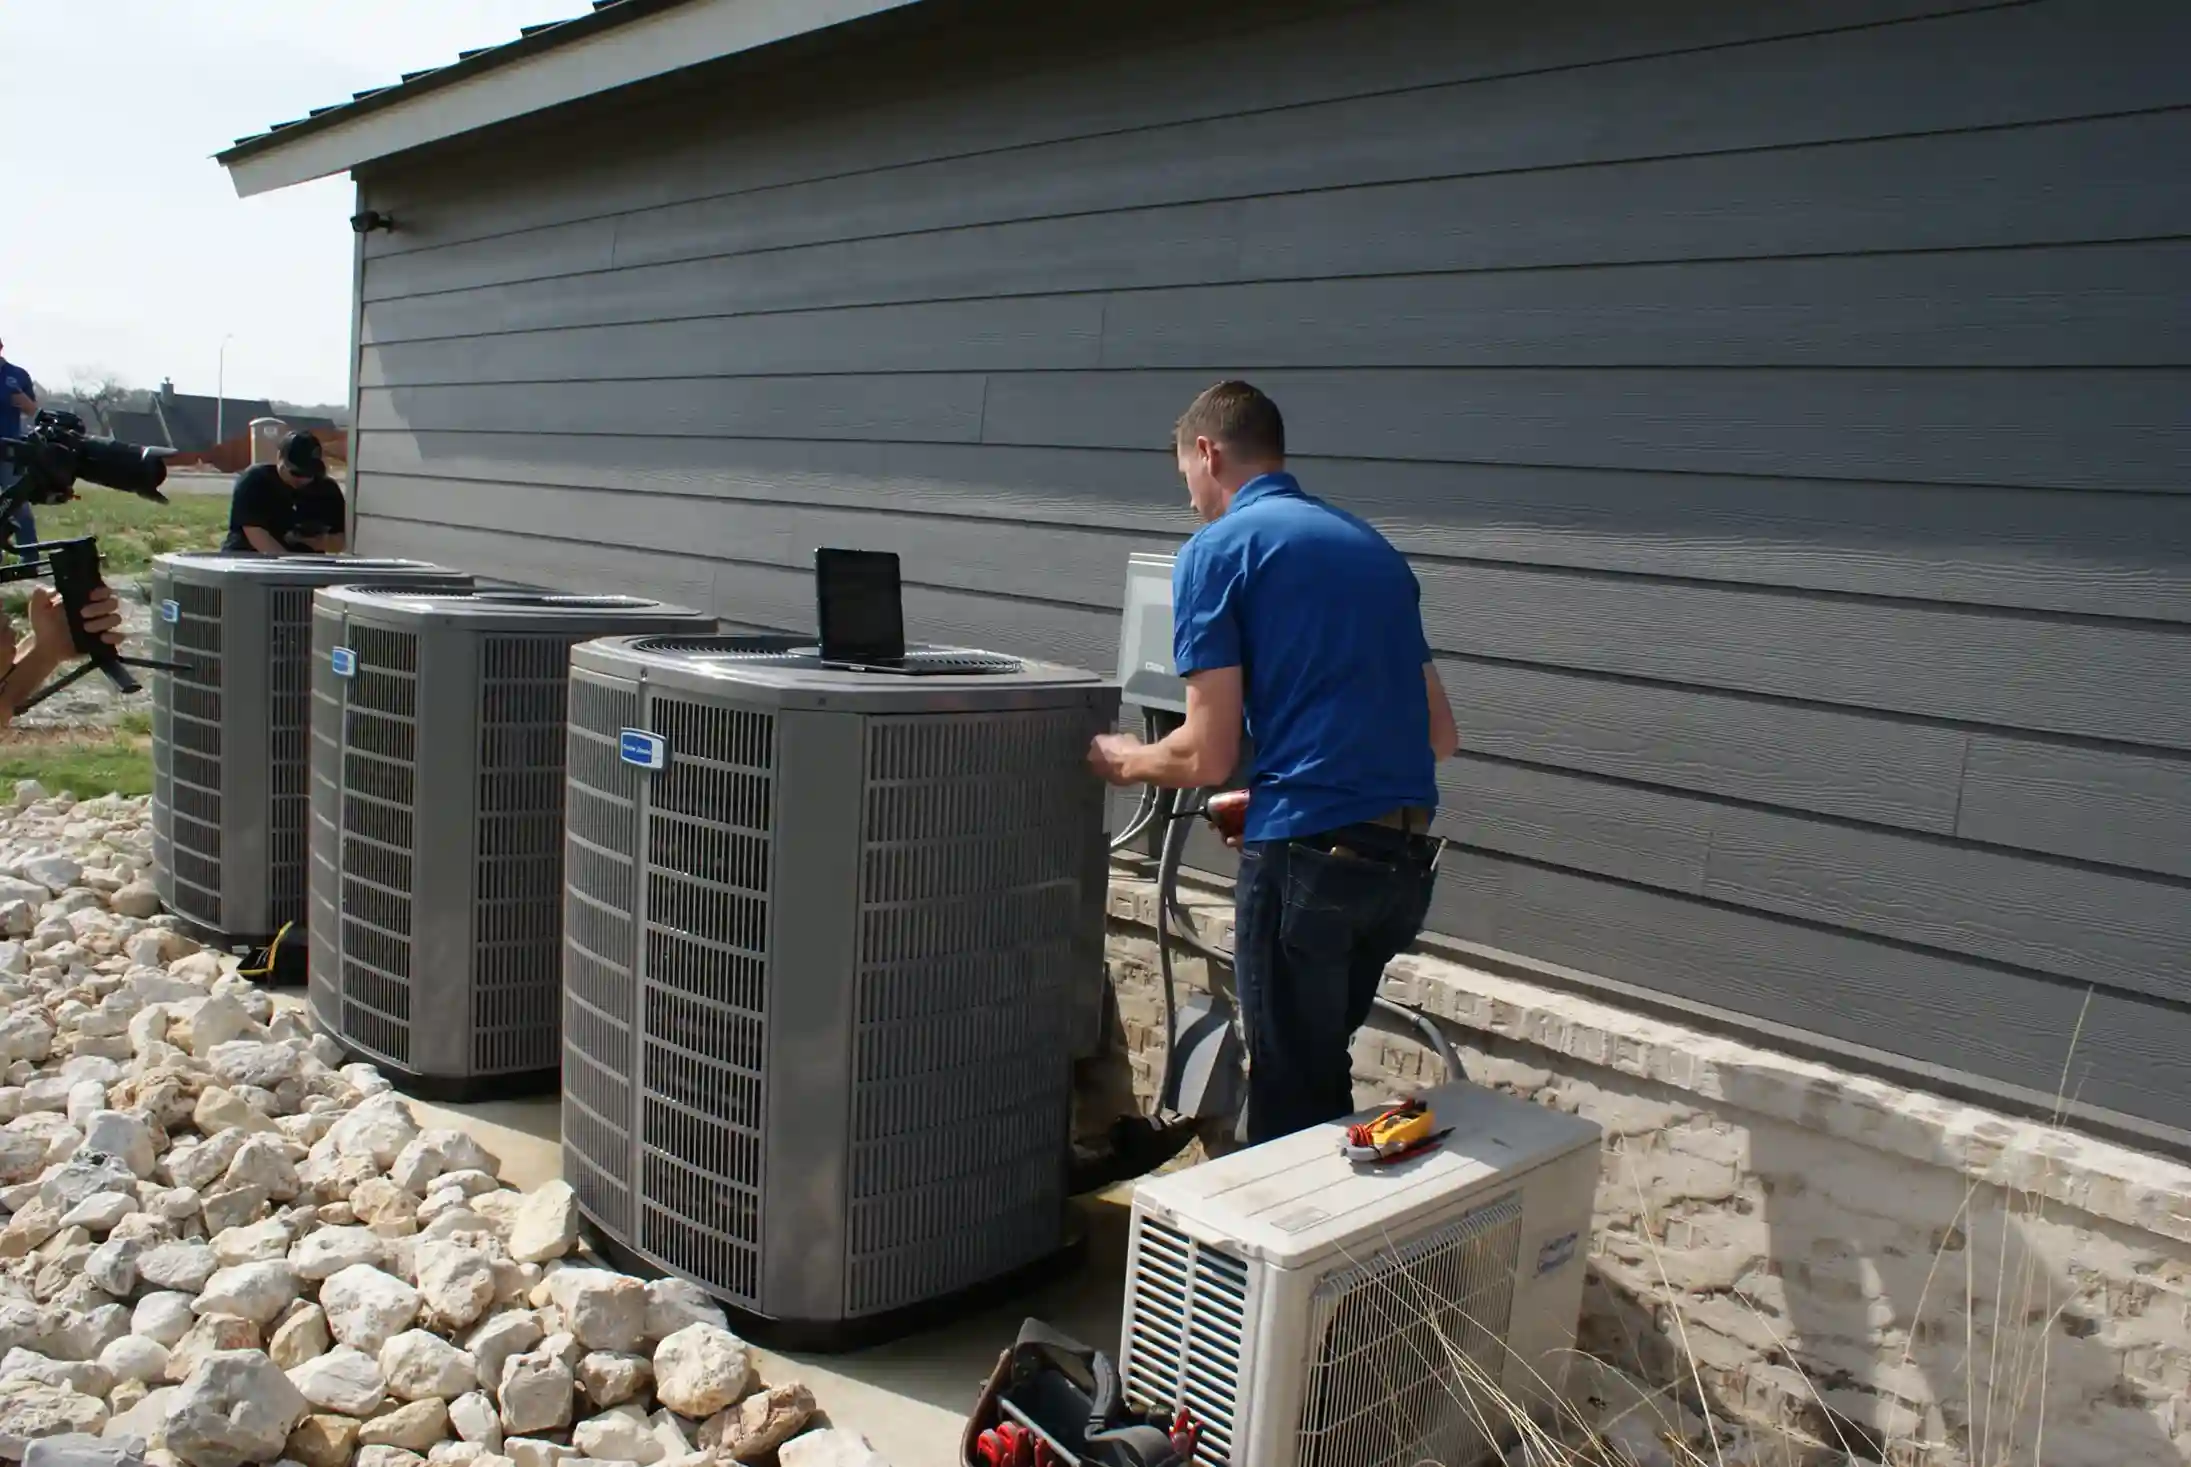 A technician in a blue polo shirt is servicing outdoor air conditioning units next to a gray building.